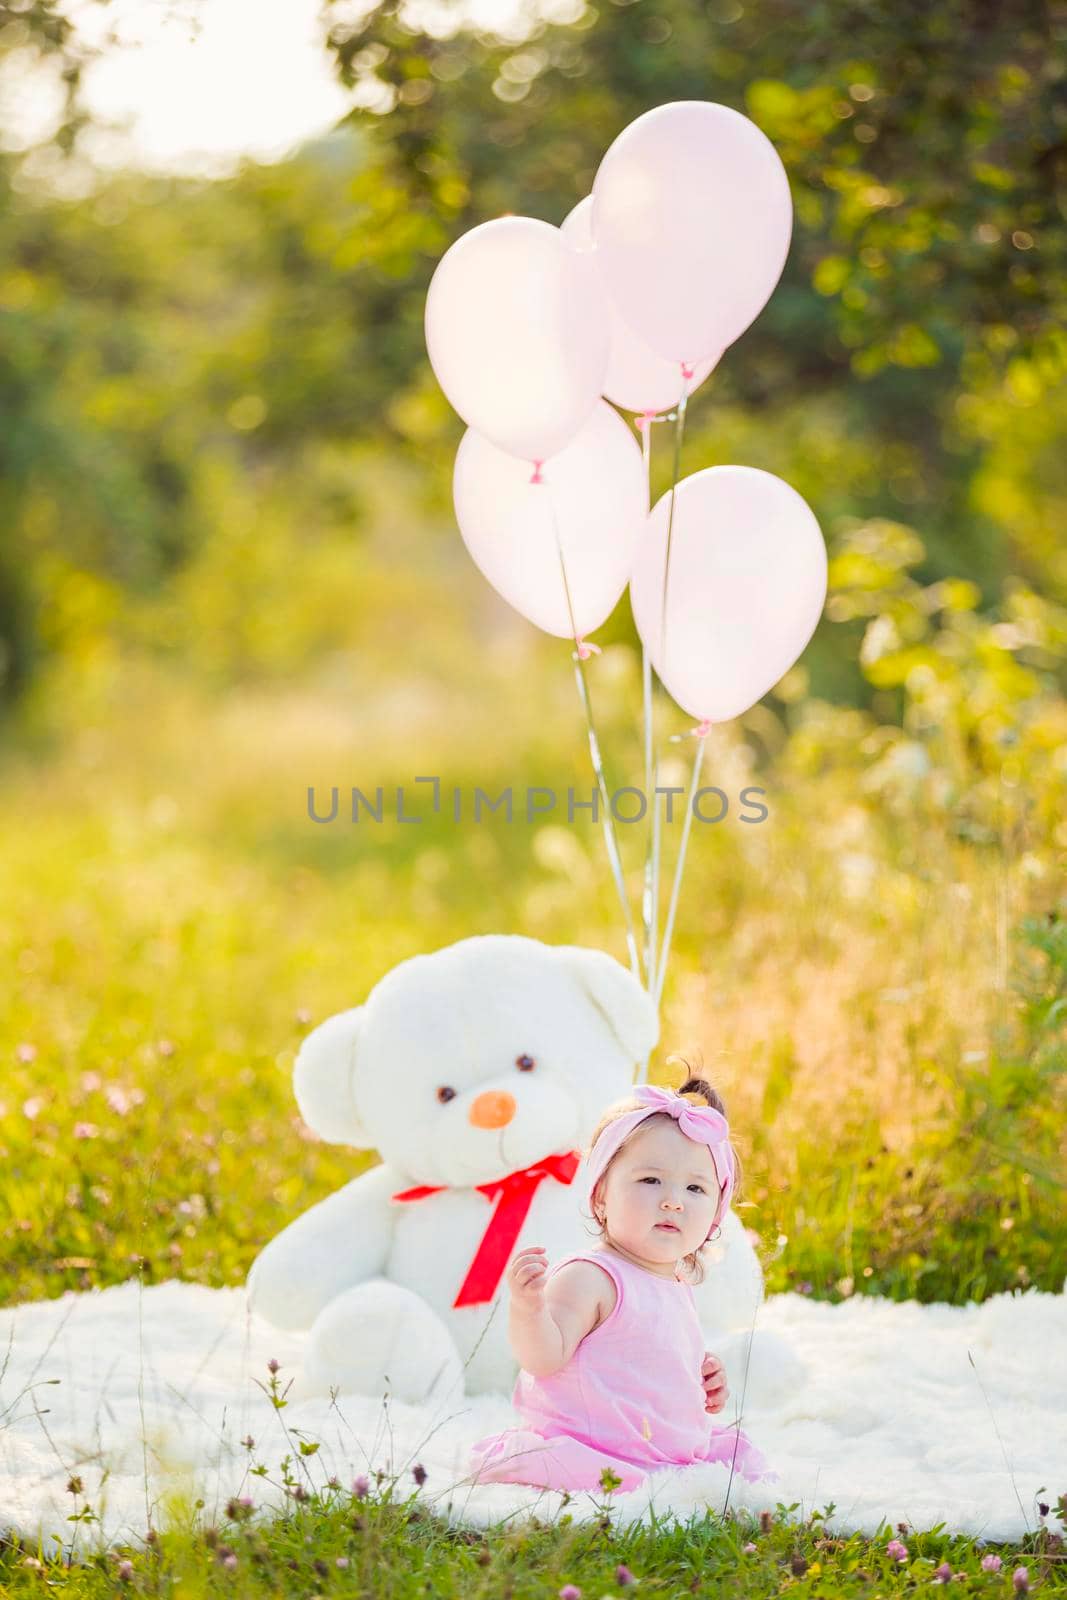 girl sitting in nature with teddy bear and balloons